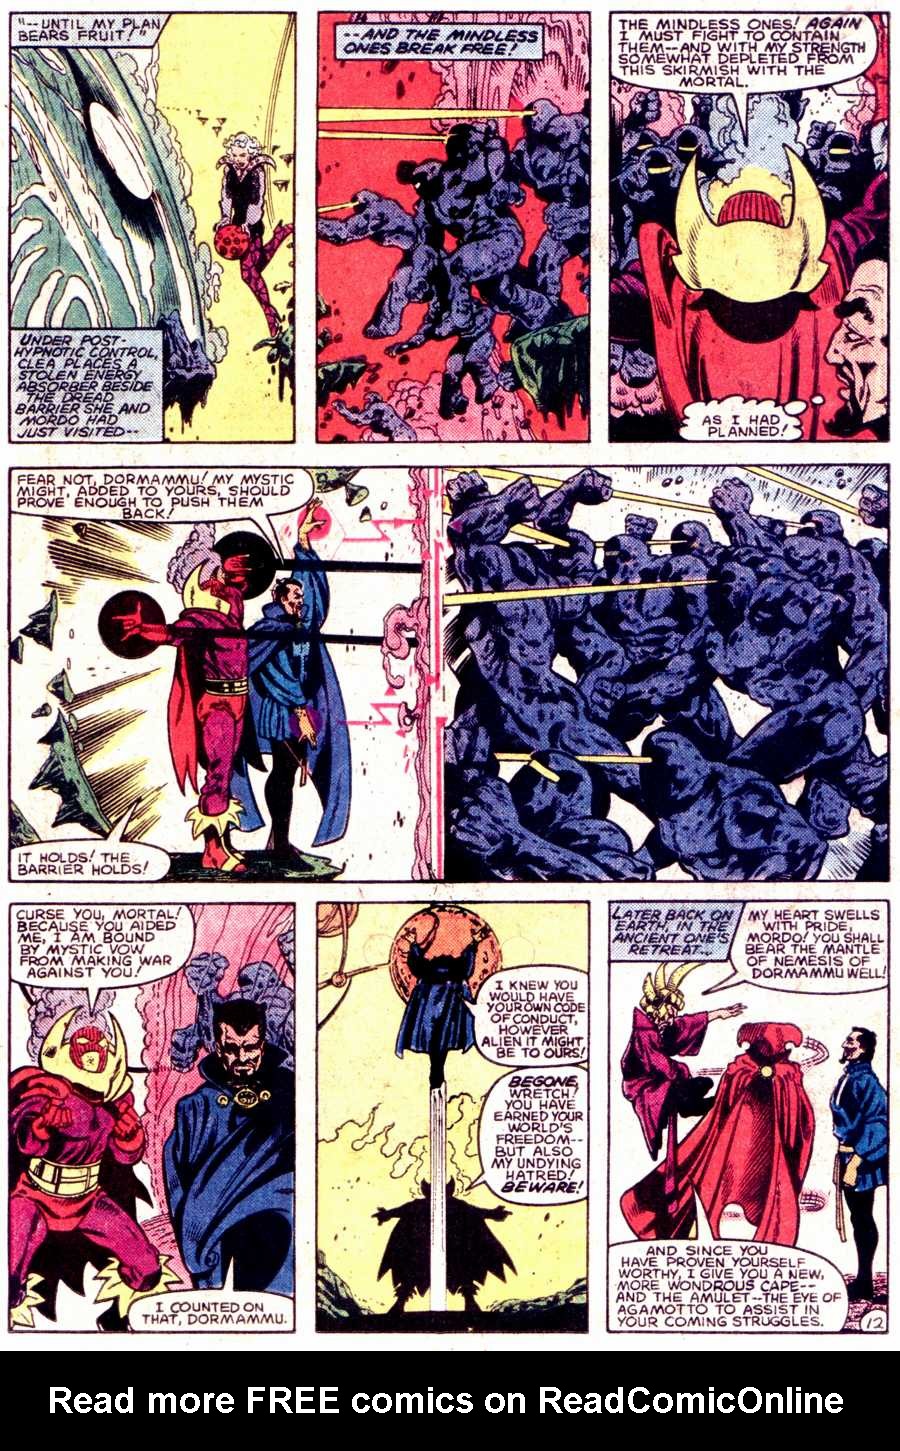 What If? (1977) issue 40 - Dr Strange had not become master of The mystic arts - Page 13